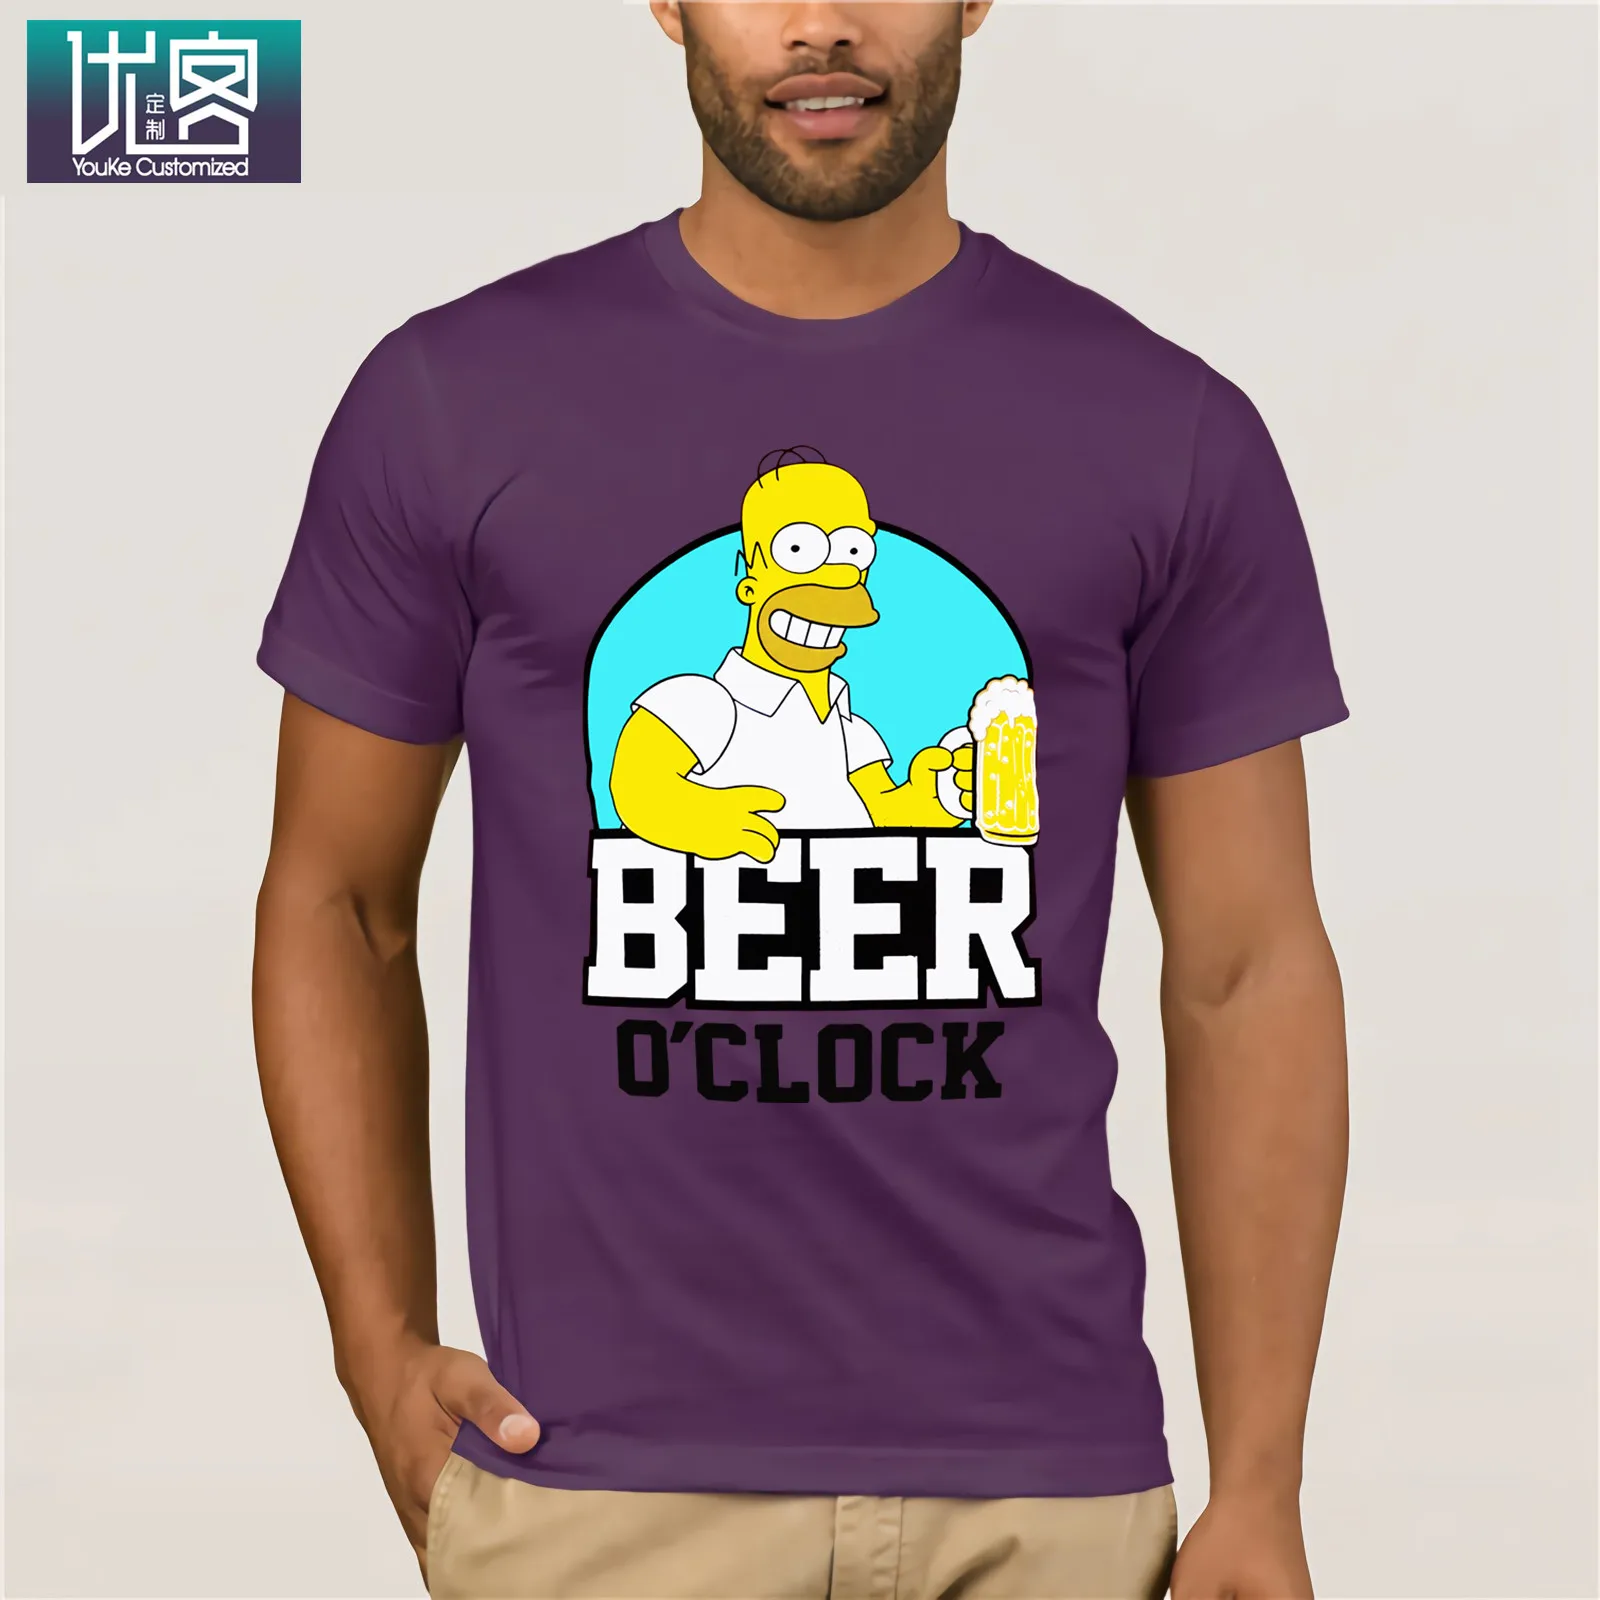 Details about   Universal Studios The Simpsons Homer Conserve Water Drink Beer Mens Shirt Medium 